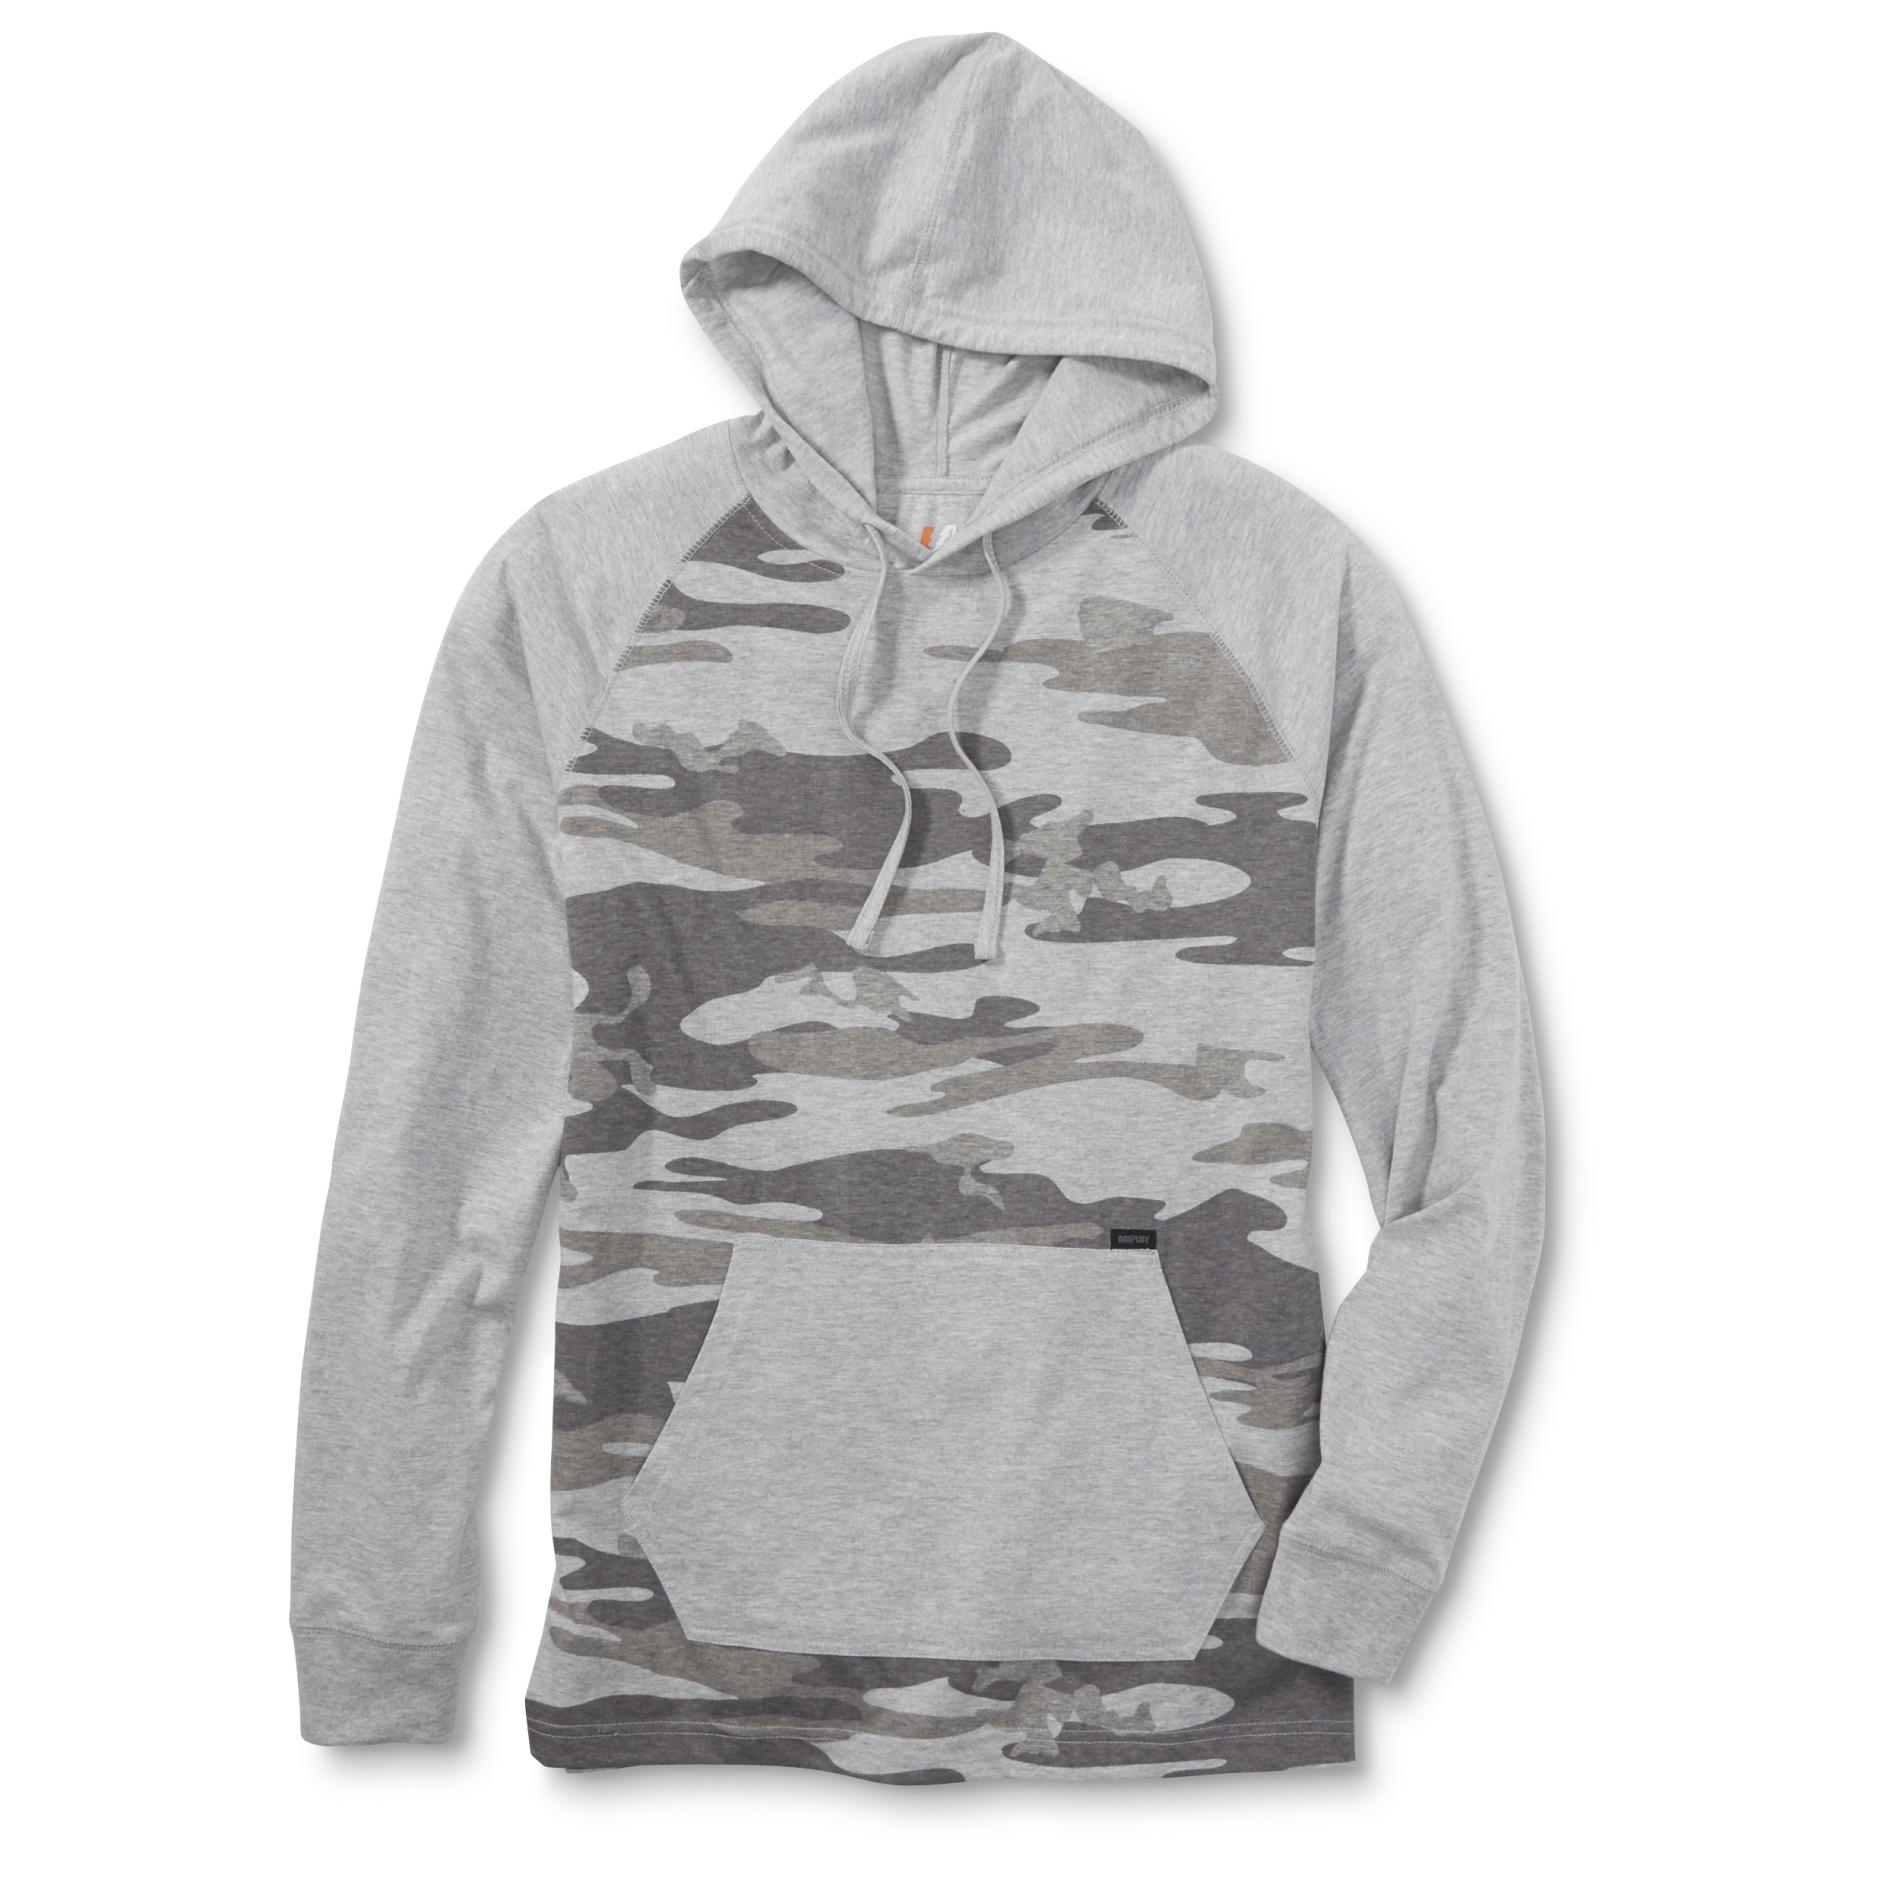 Amplify Young Men's Hoodie - Camouflage